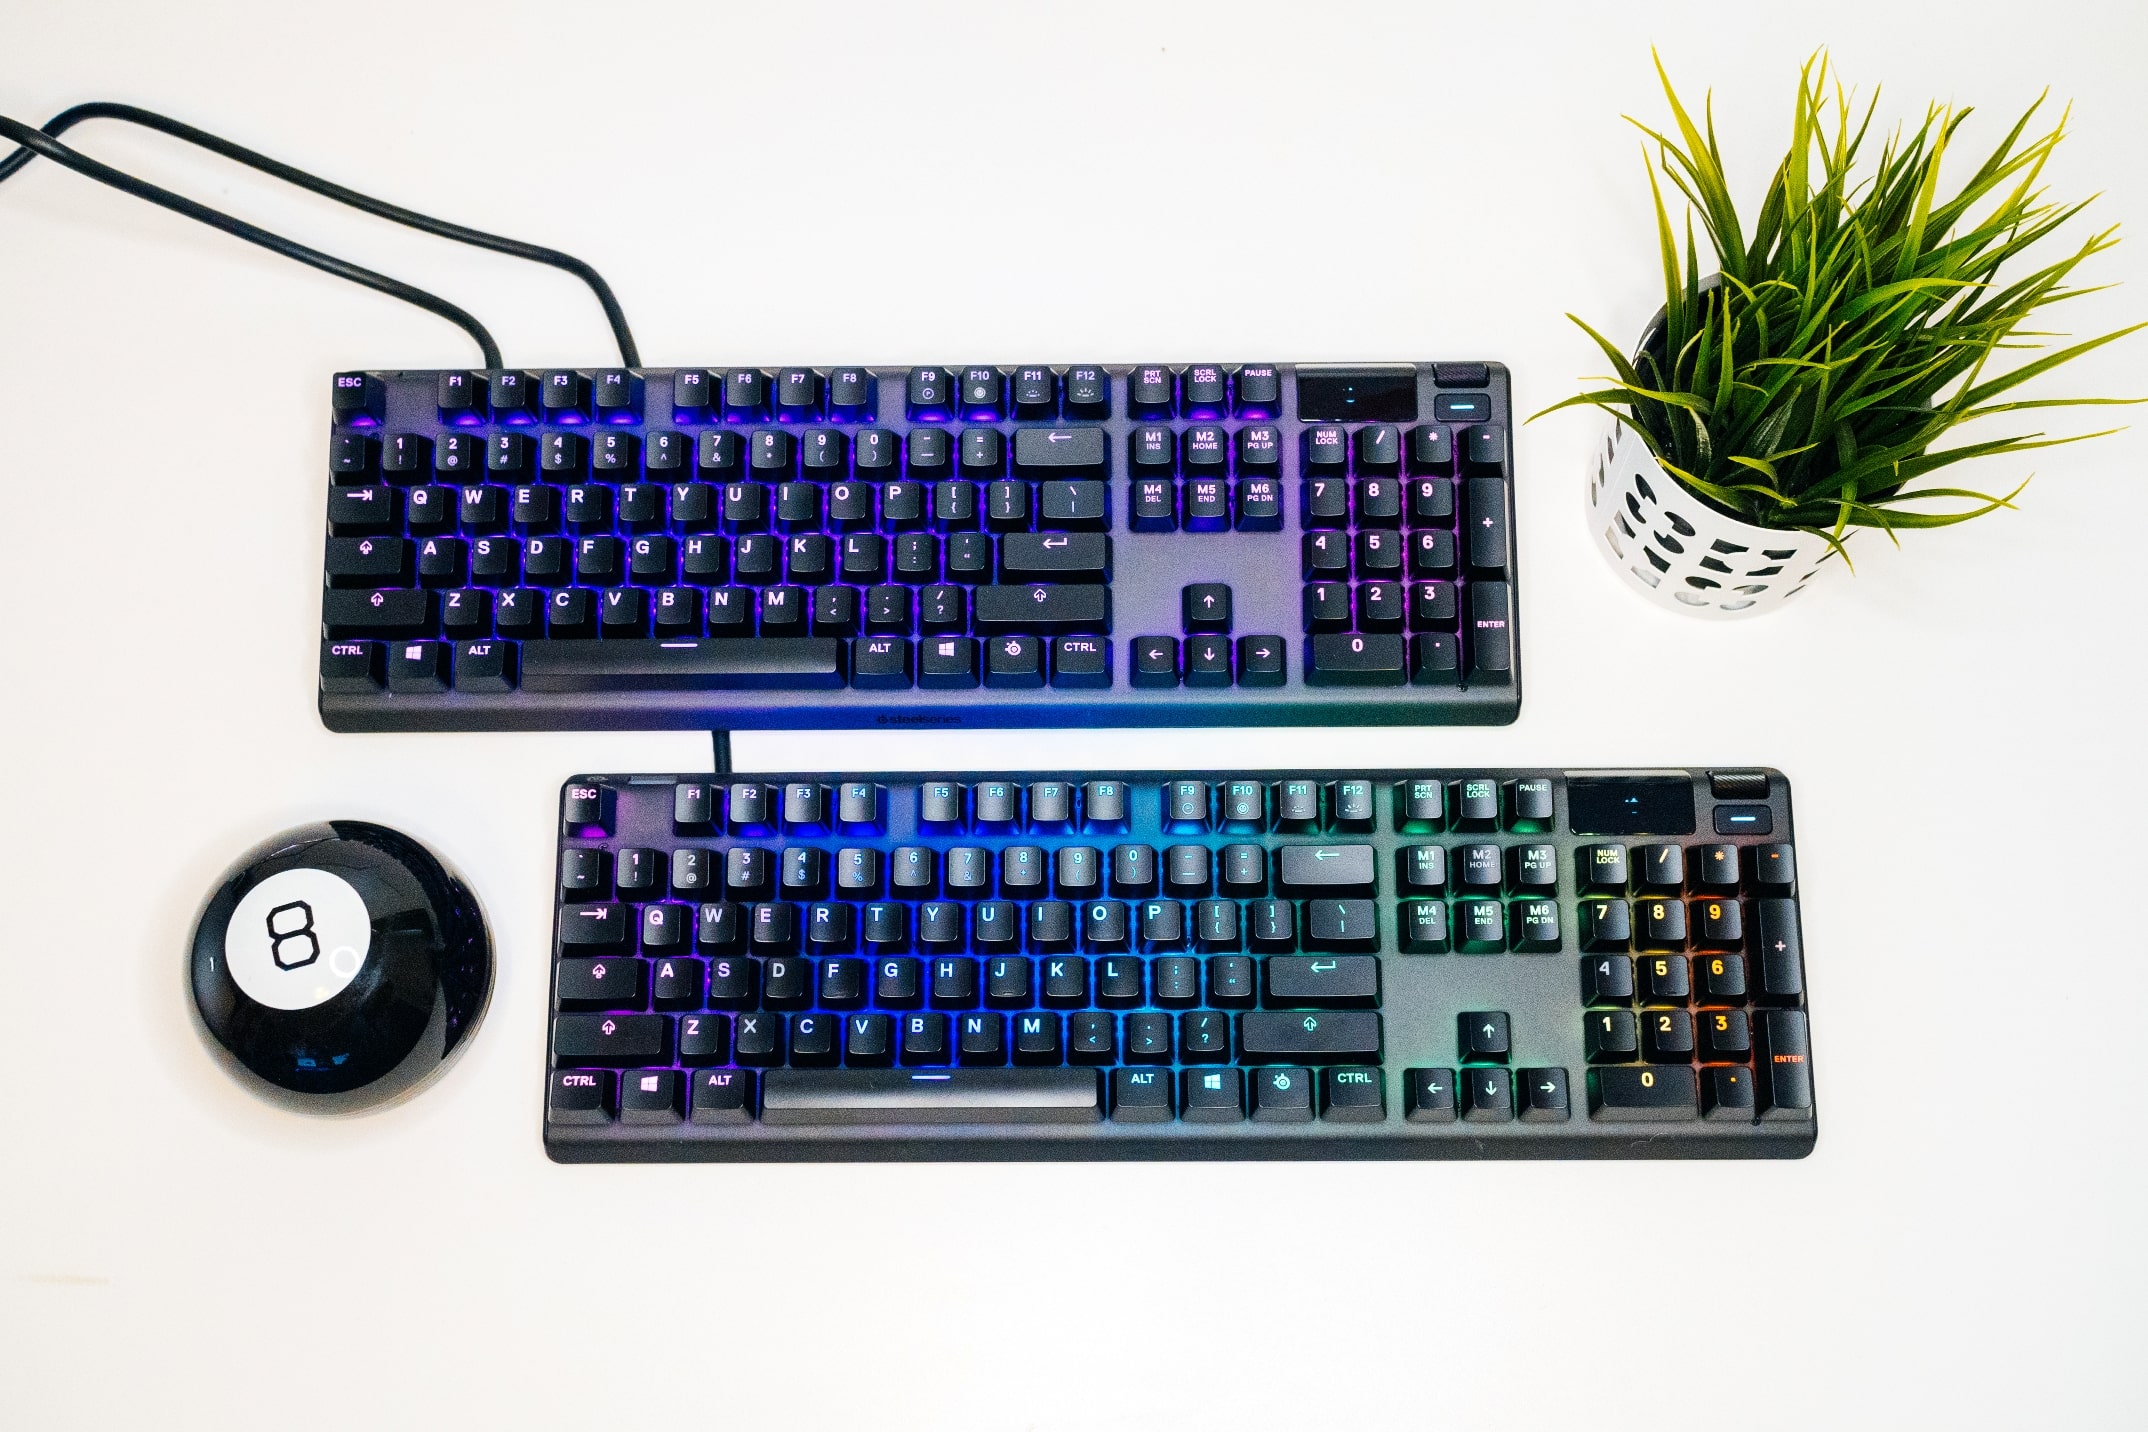 Apex 7 and Apex Pro keyboards